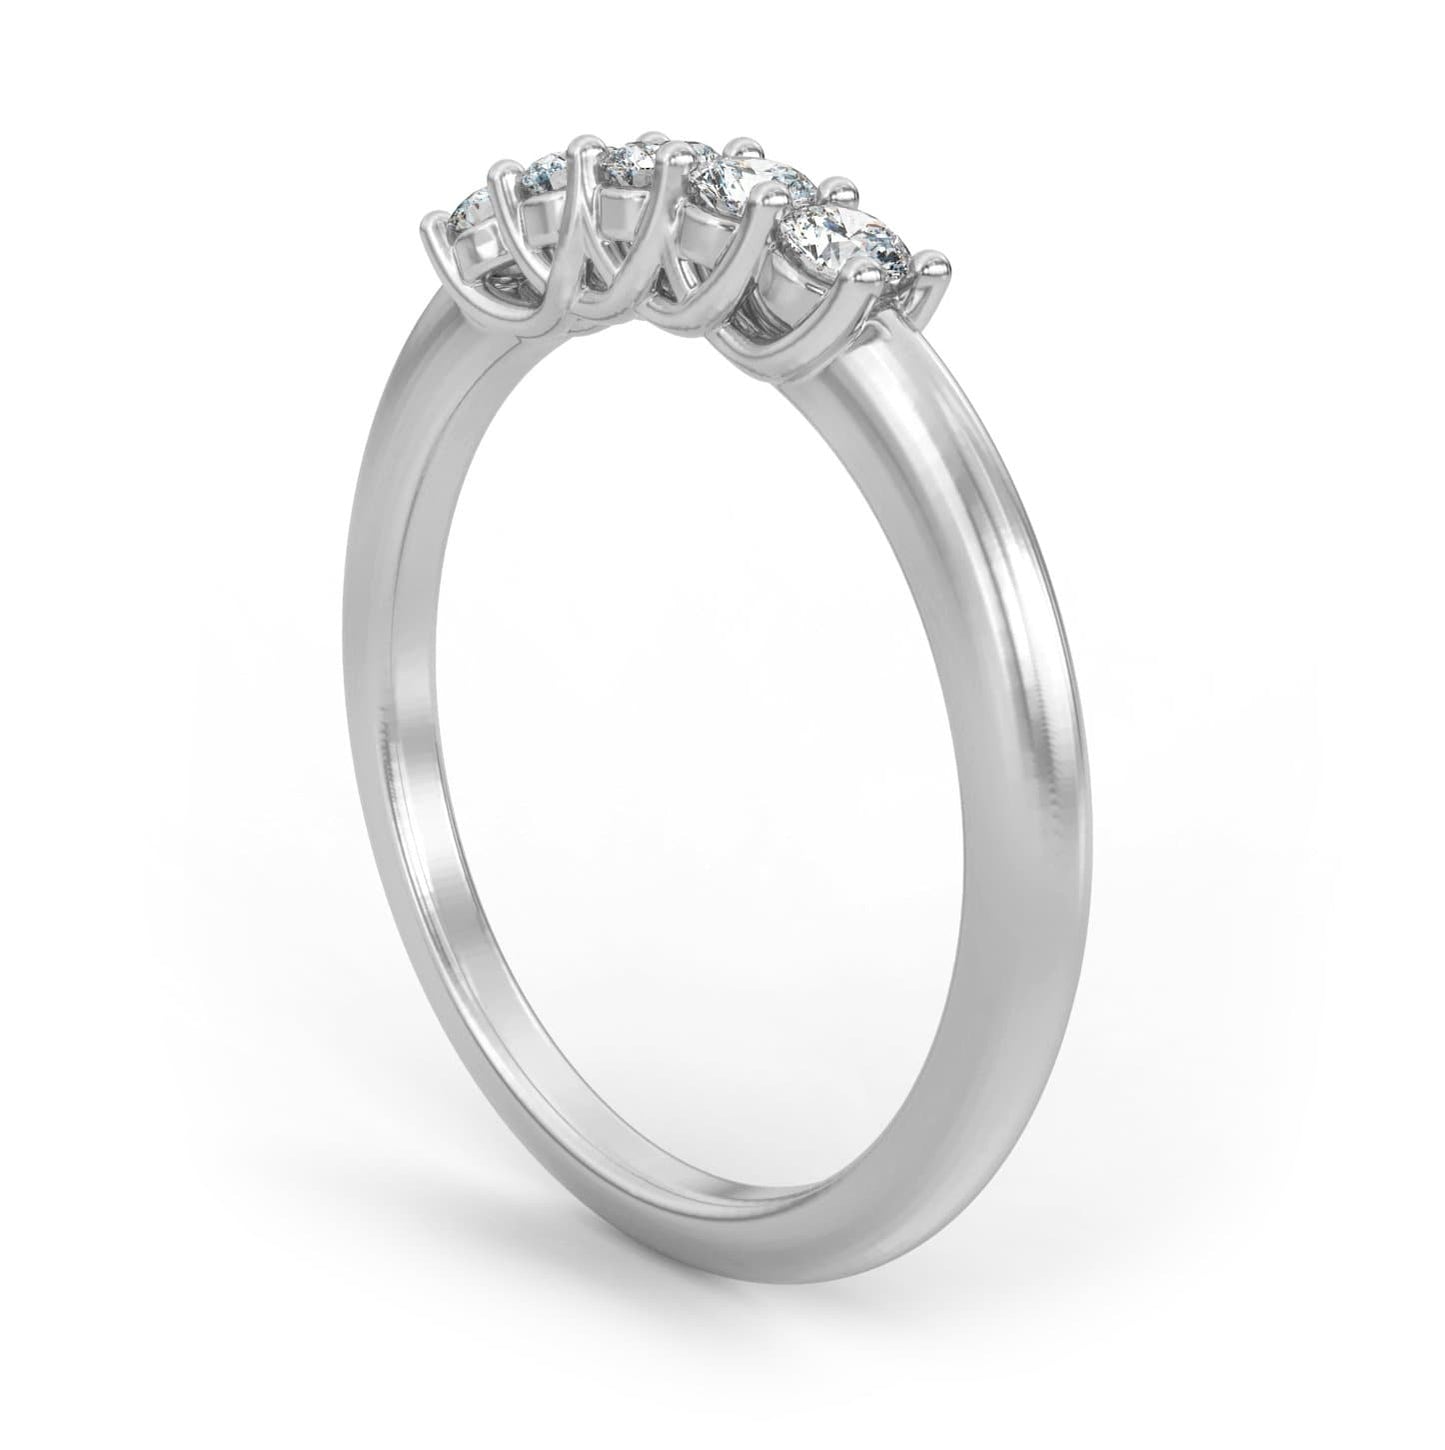 0.25ct Five Stone Diamond Shared Prong Ring in 14k Gold